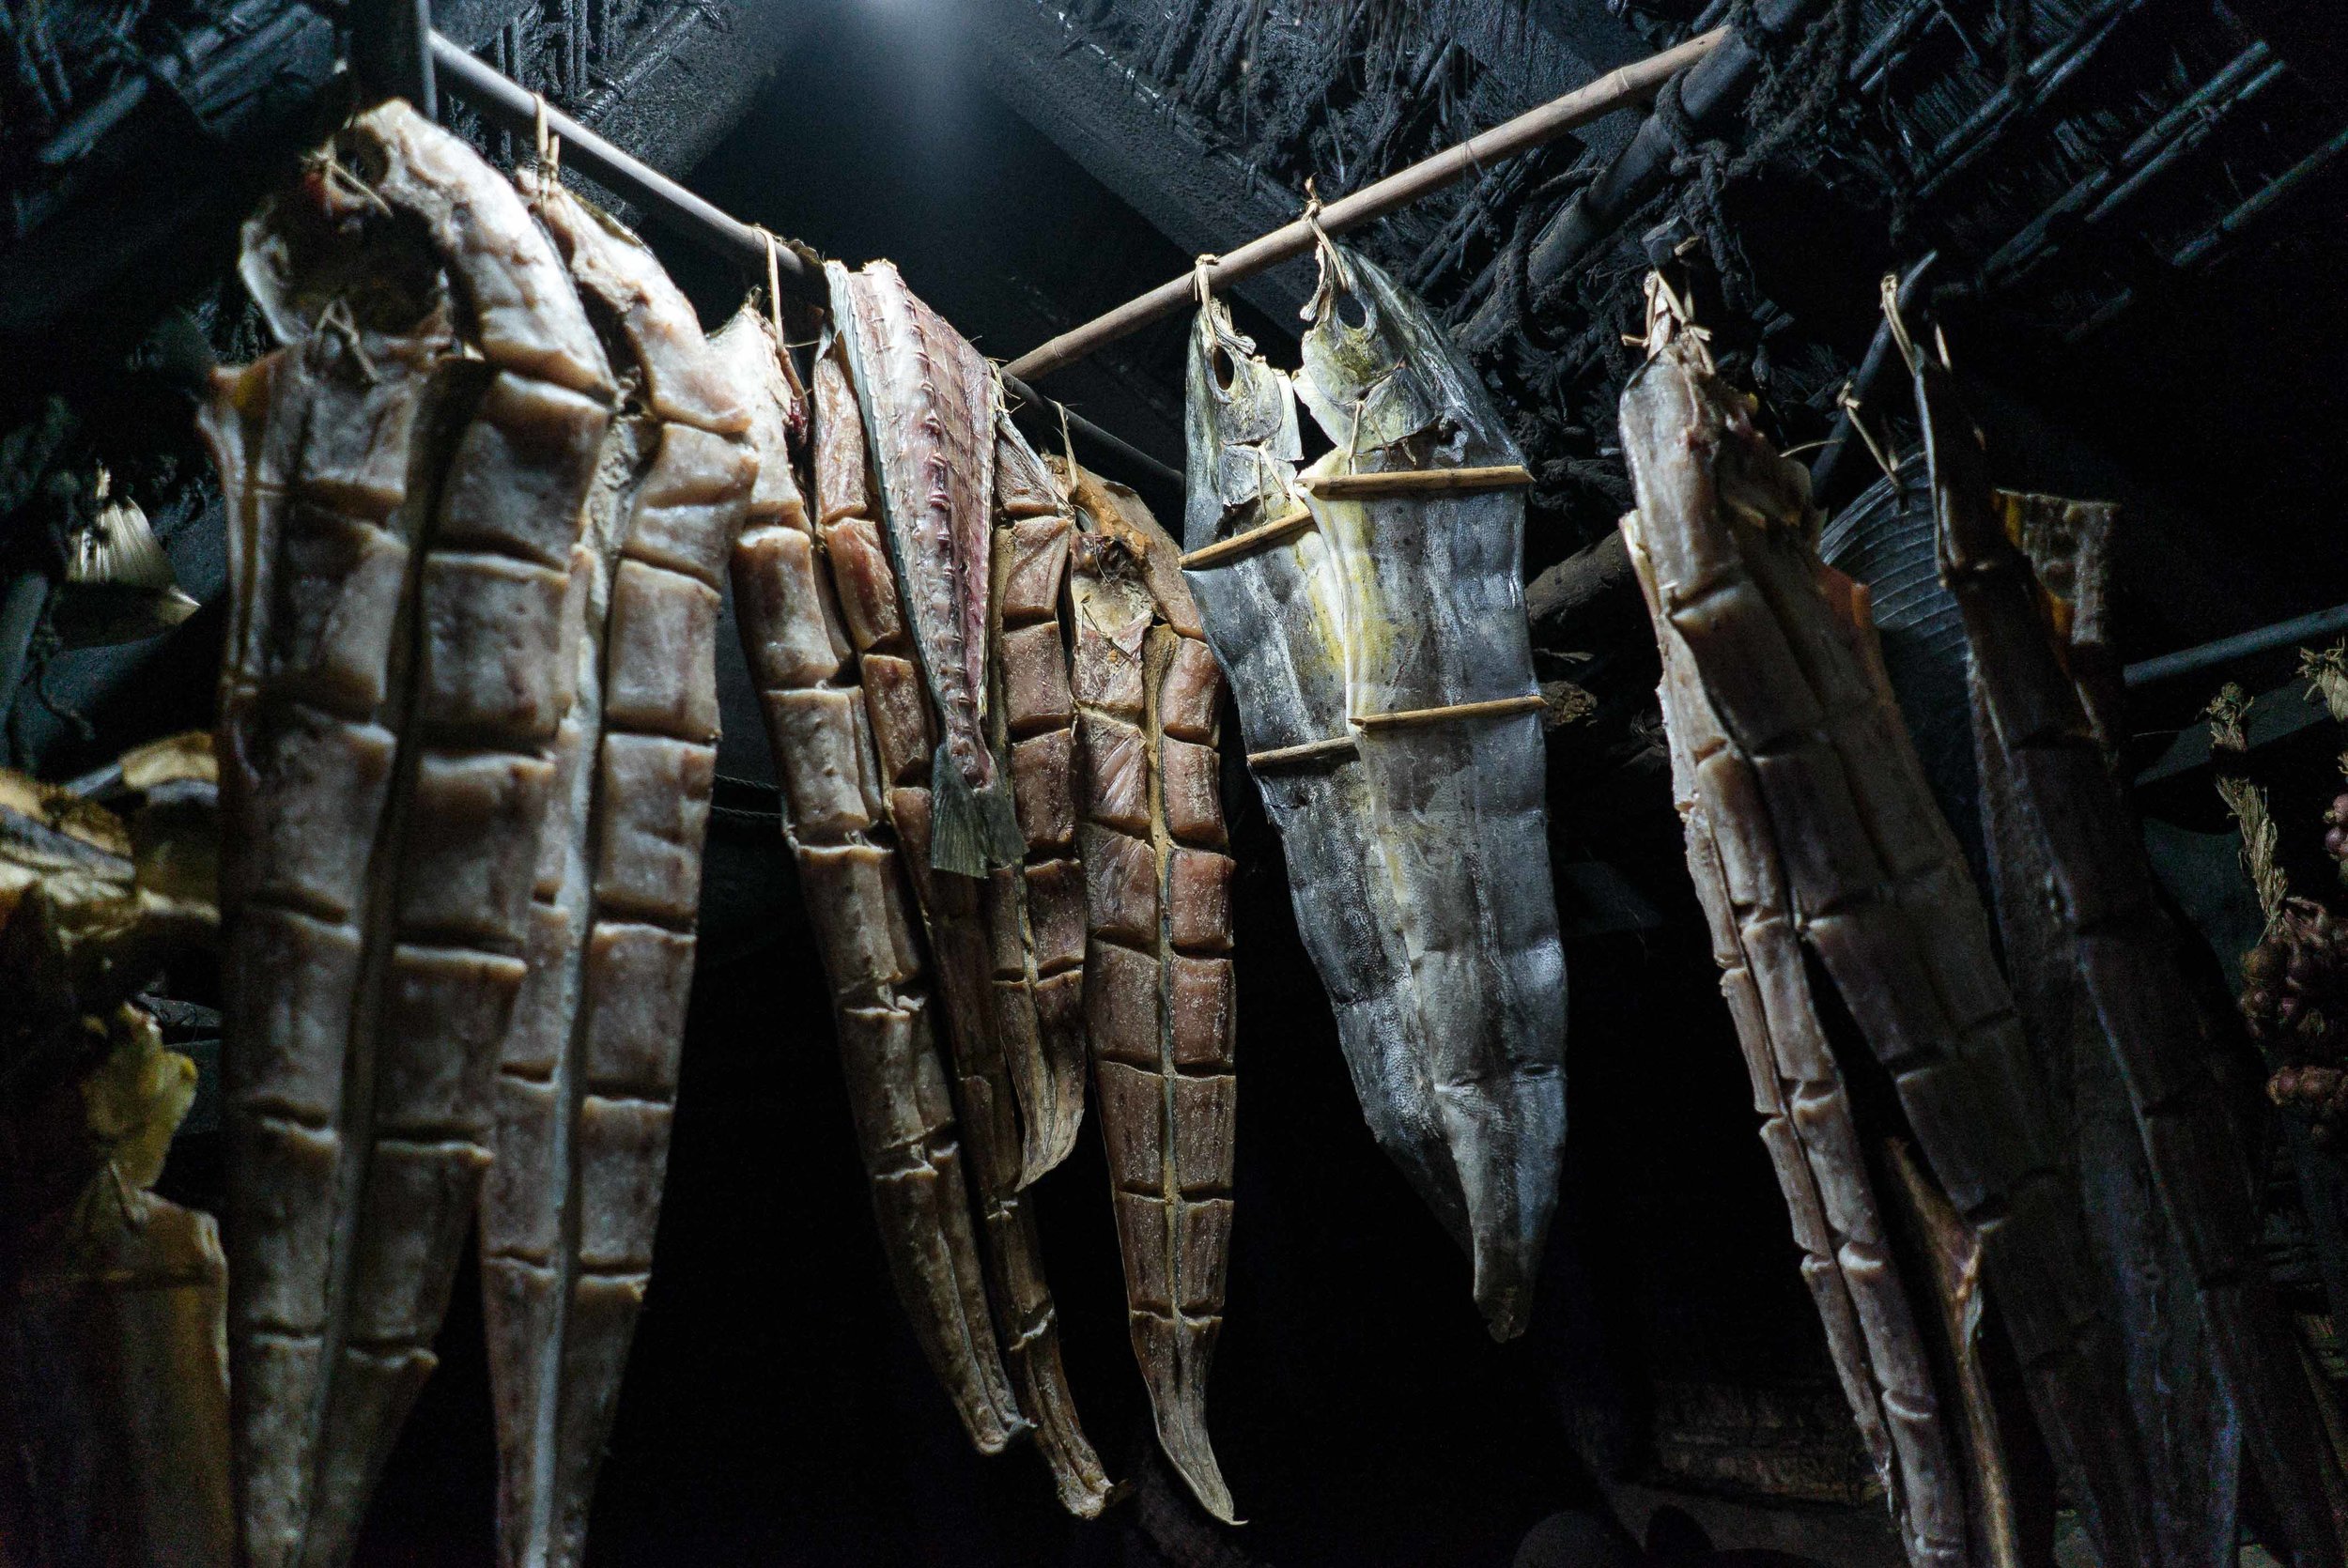  Smoked dorados are hung inside the fishermen's homes.&nbsp;Mahataos practice smoking as a curing method to have a supply of fish throughout the year. 